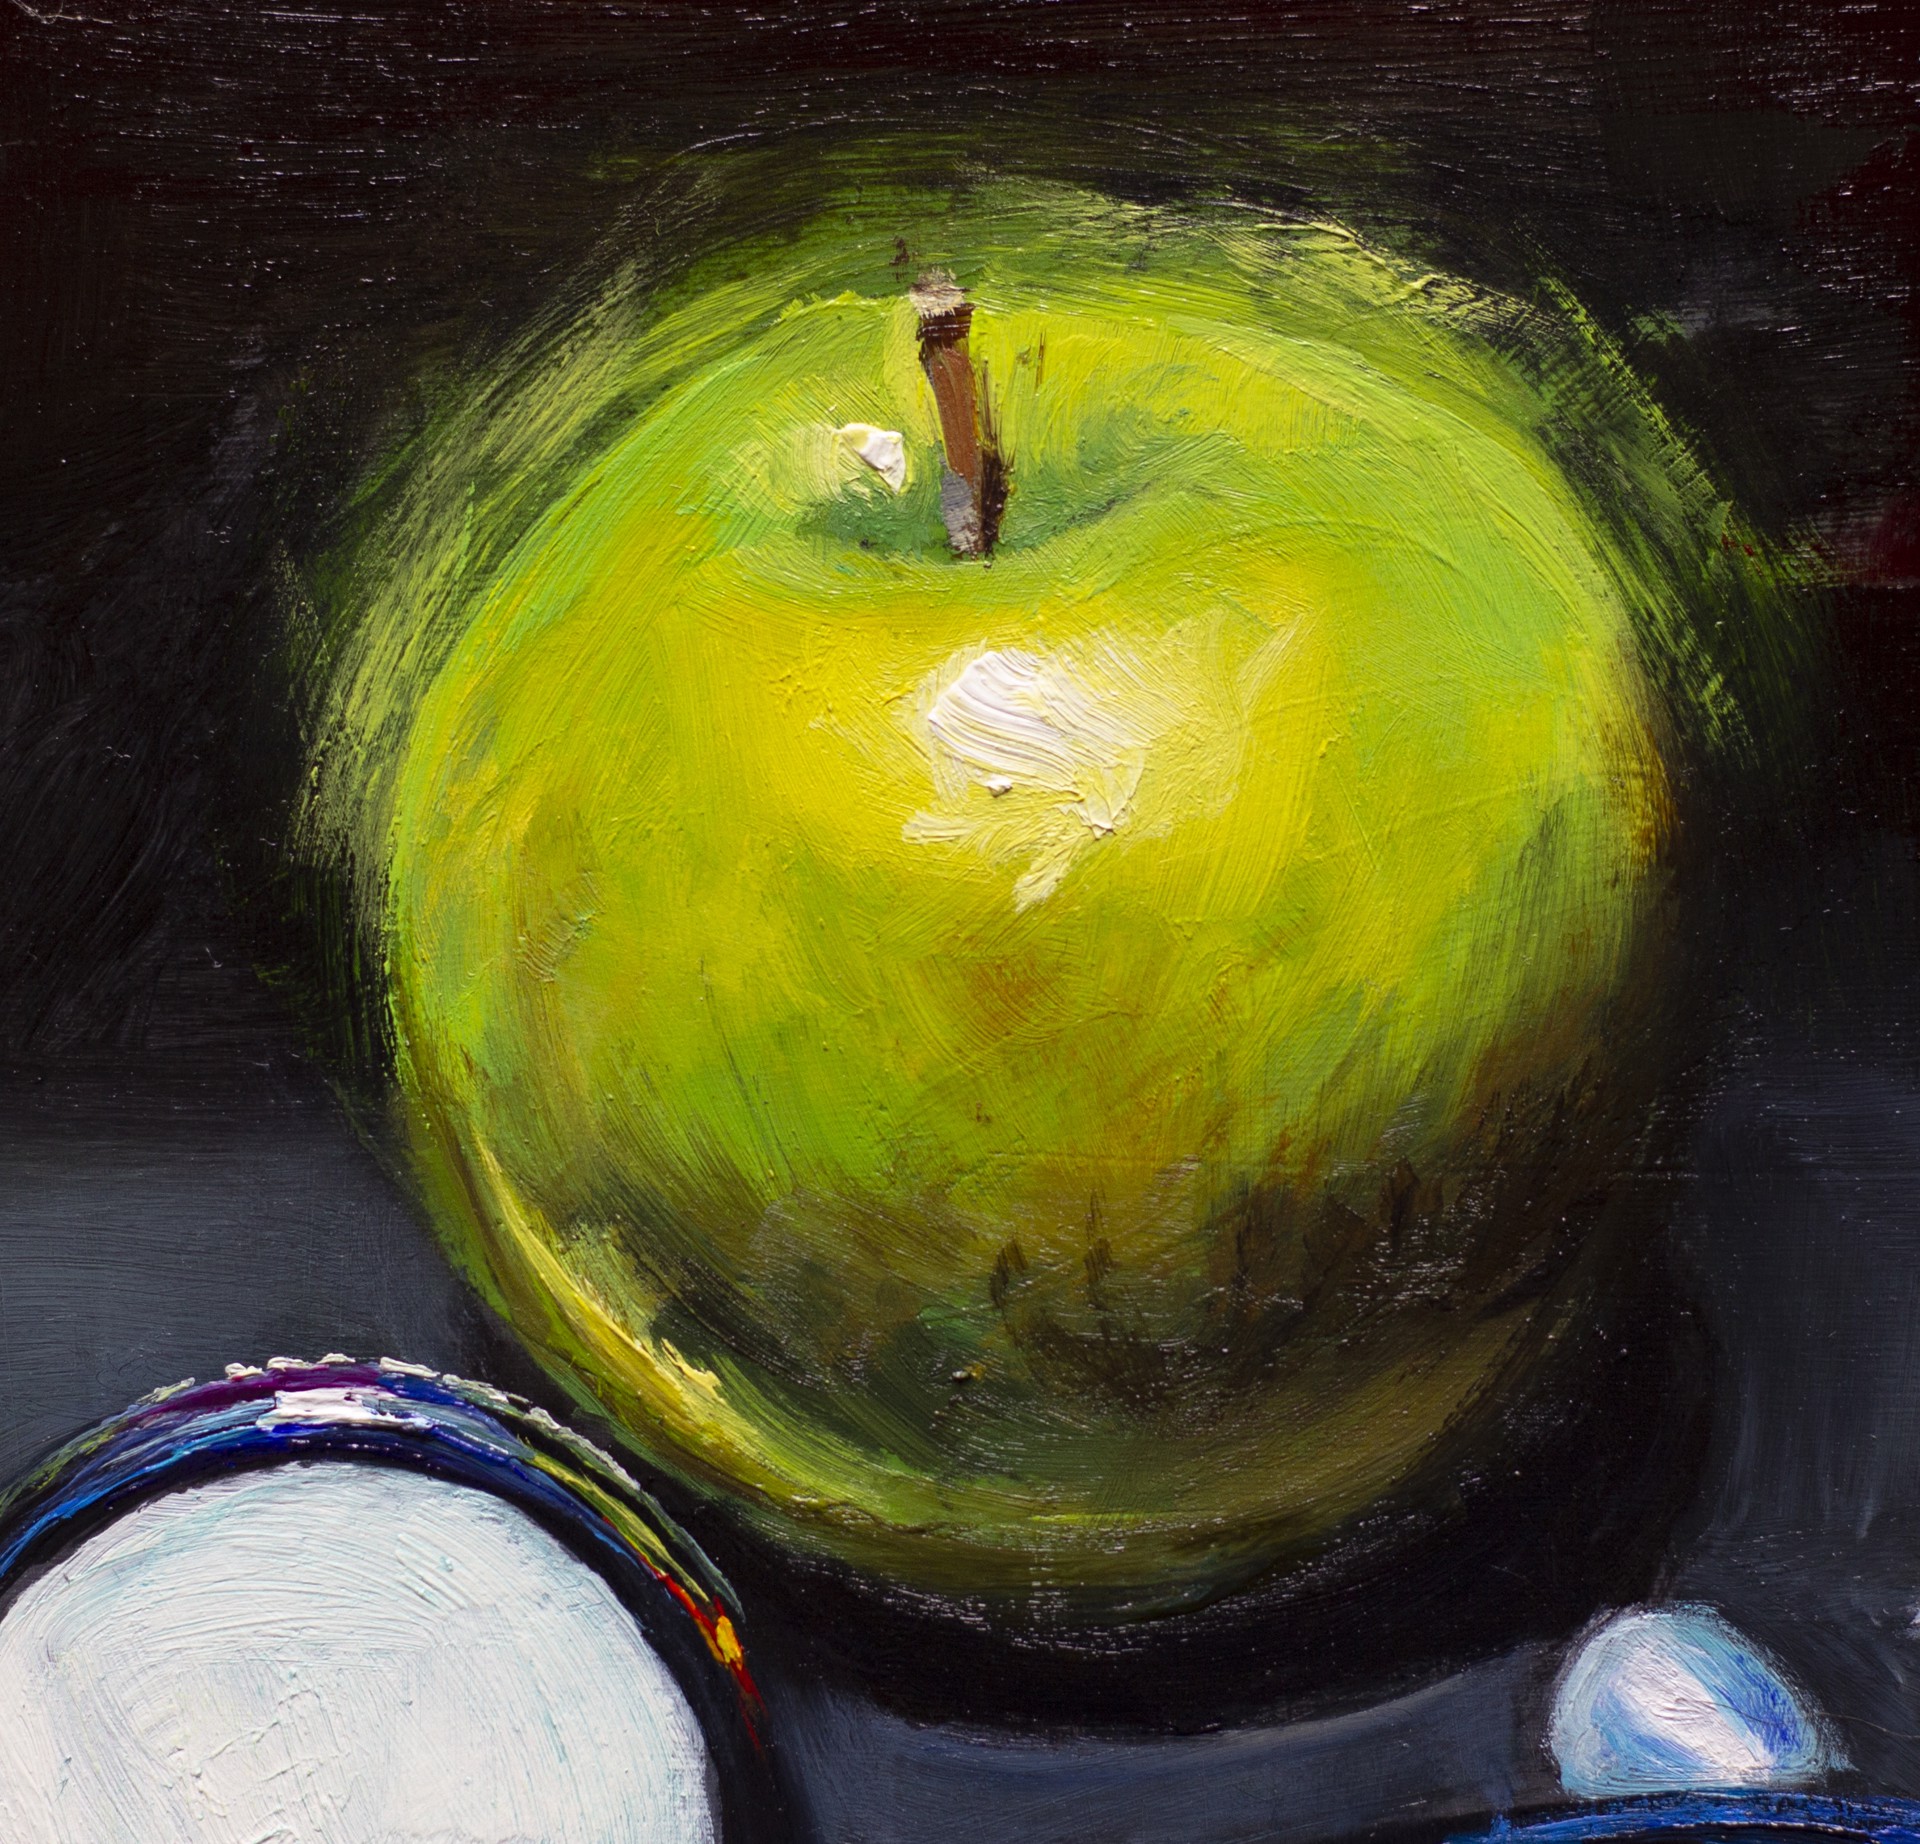 An Apple a Day by Daire Lynch